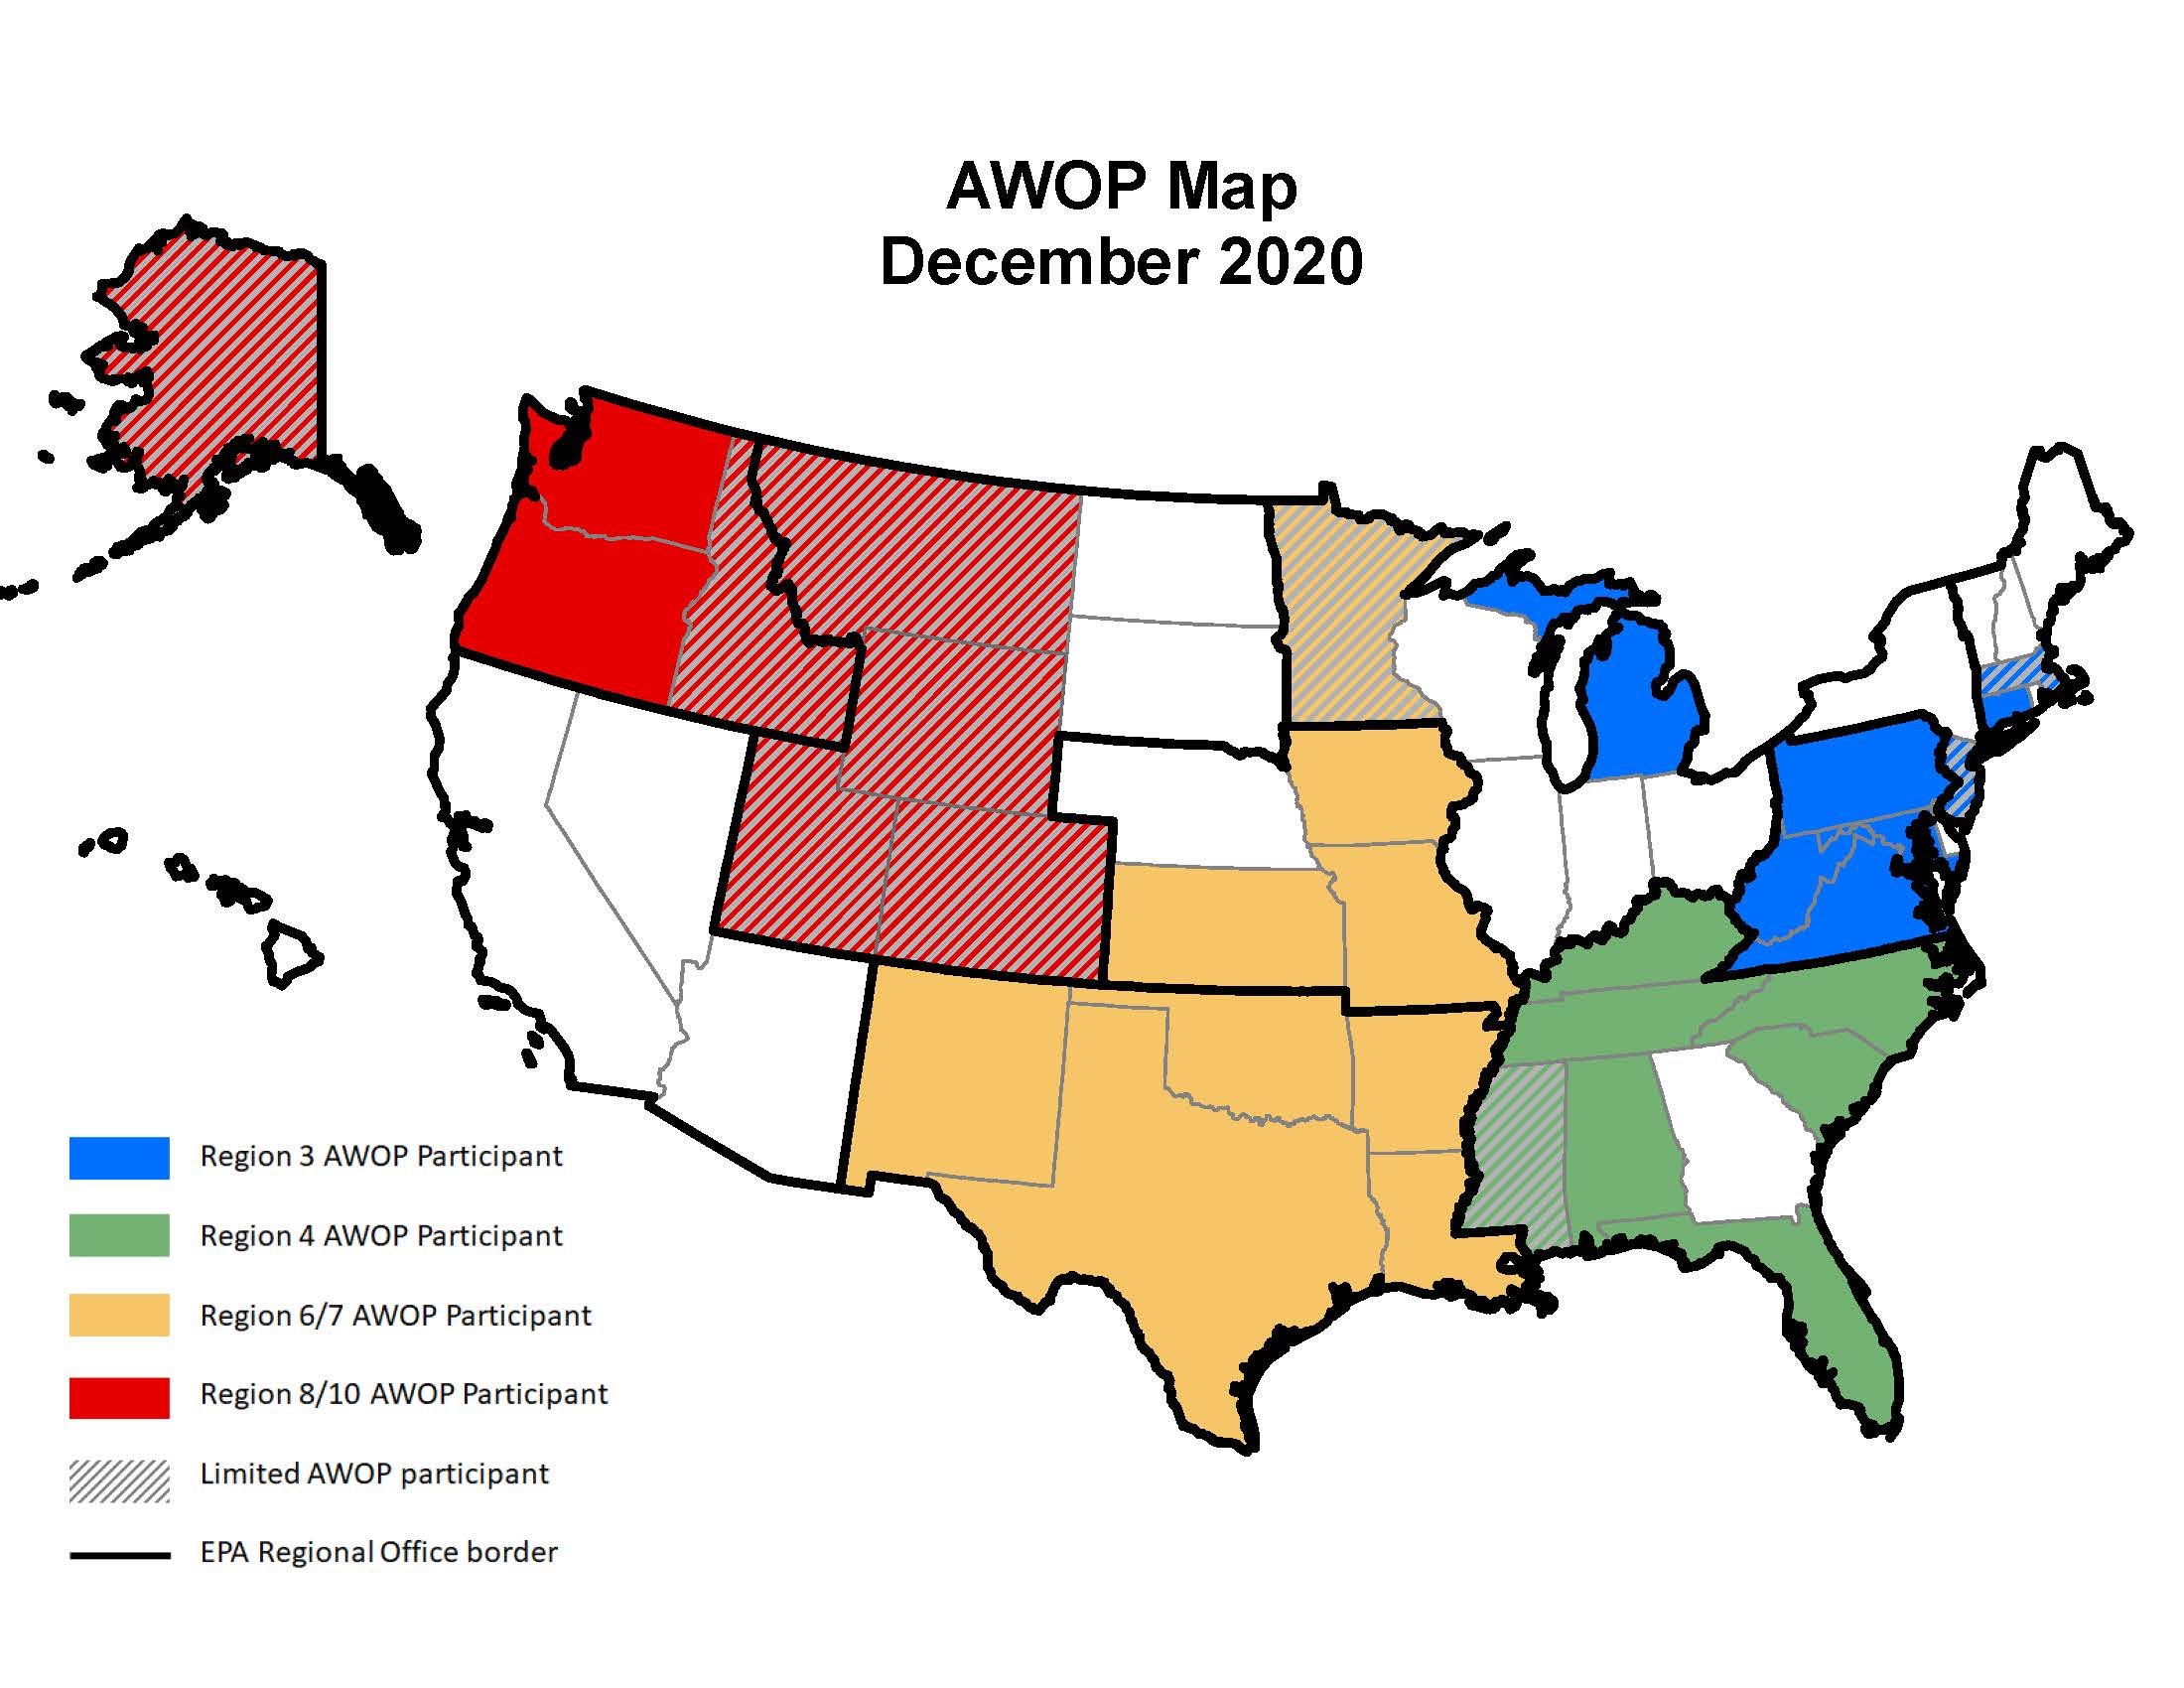 States and regions participating in AWOP.